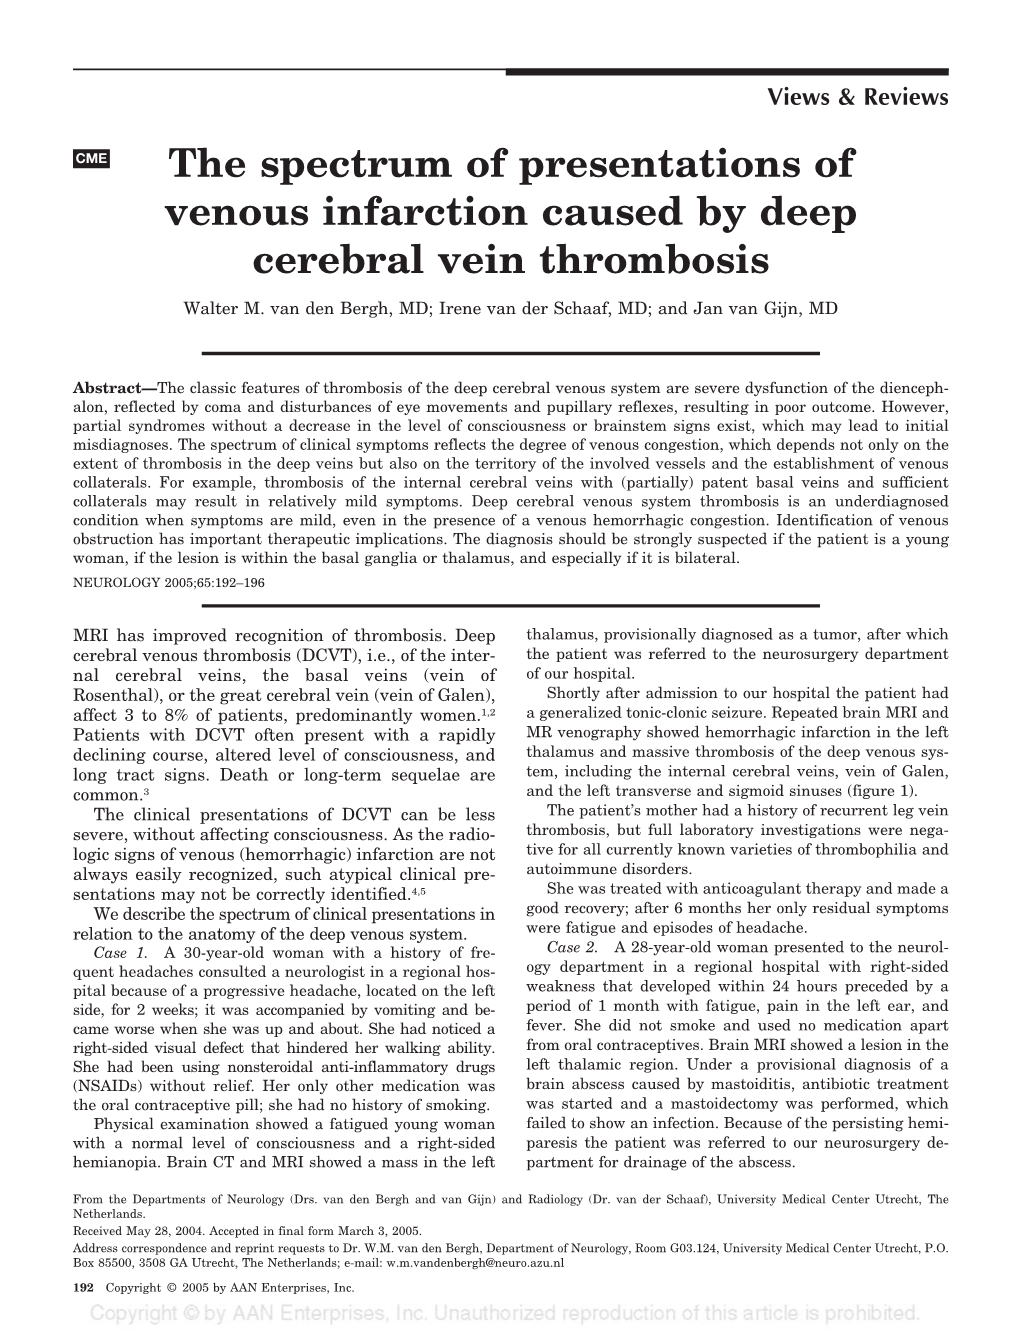 The Spectrum of Presentations of Venous Infarction Caused by Deep Cerebral Vein Thrombosis